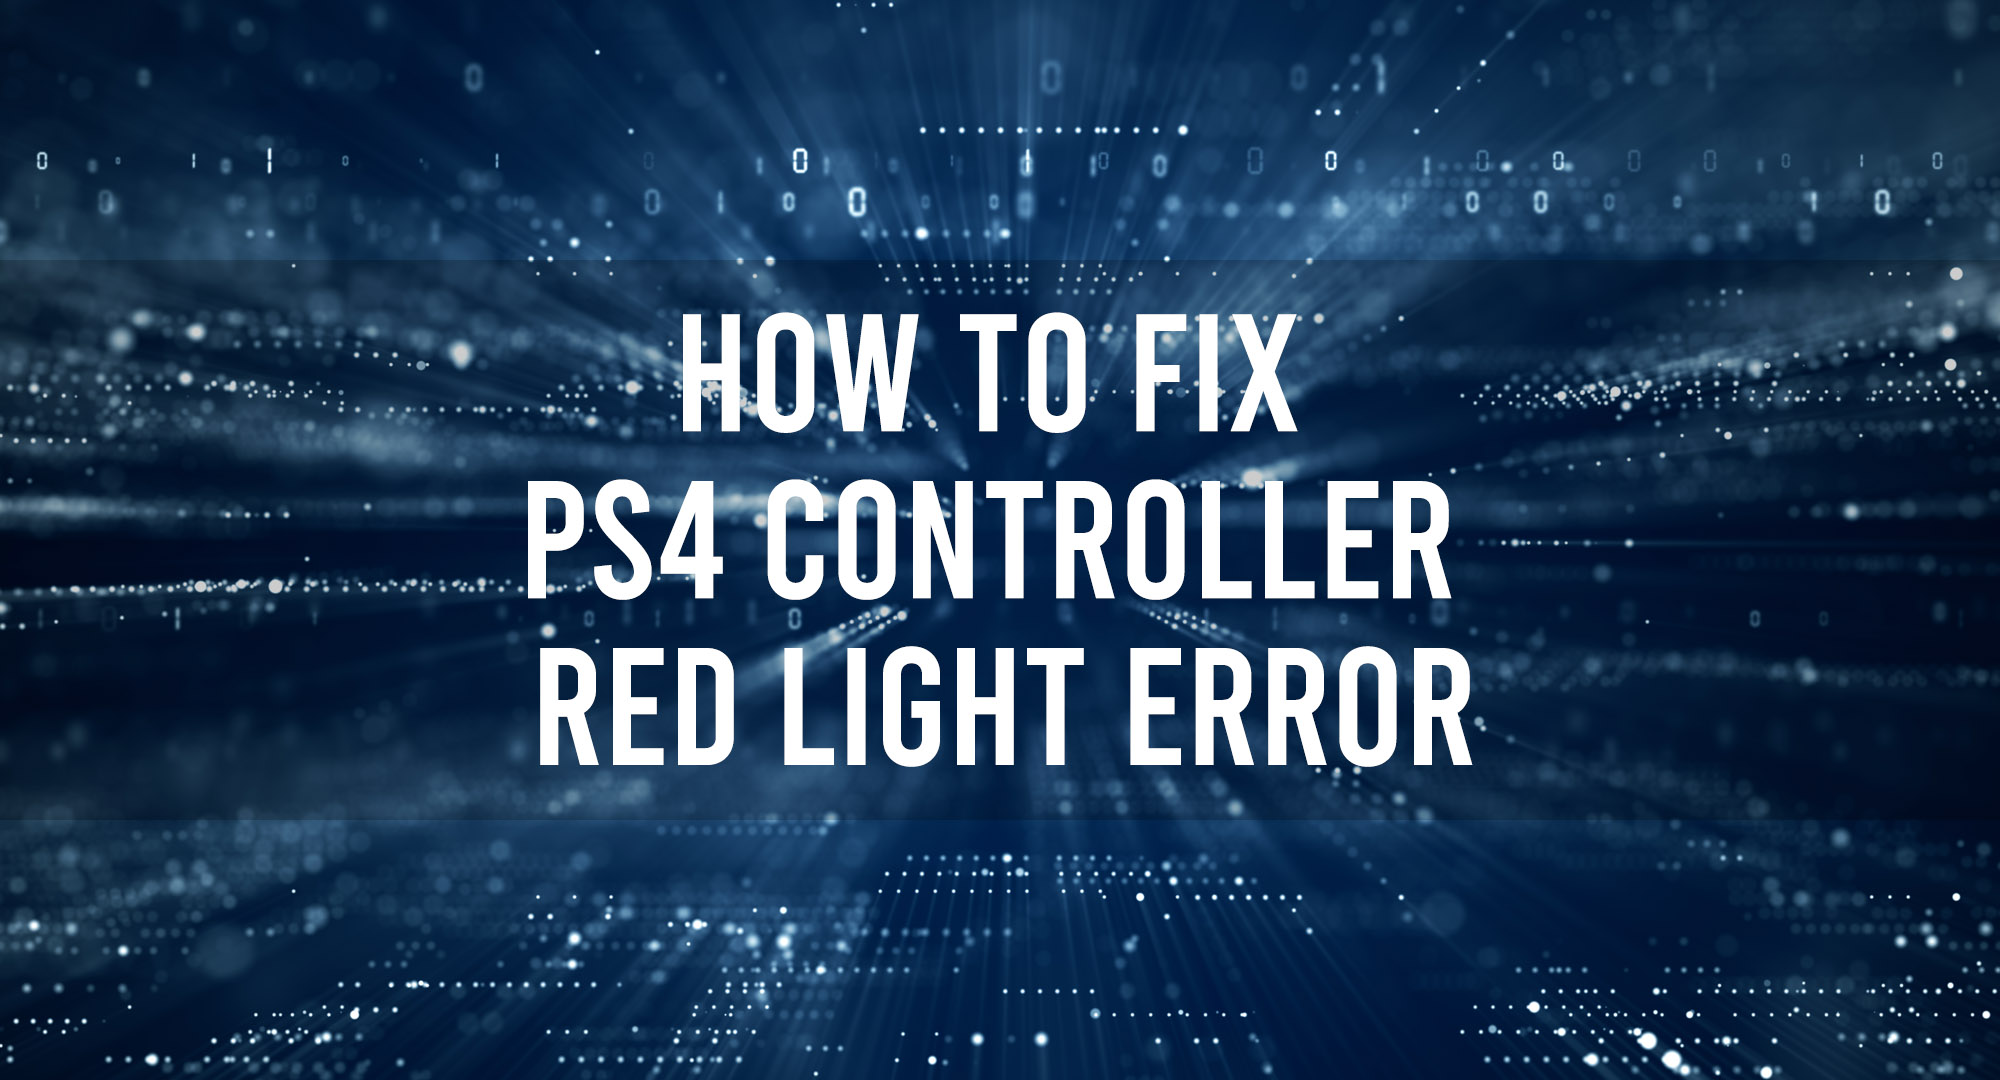 How to fix PS4 Controller Red Light Error